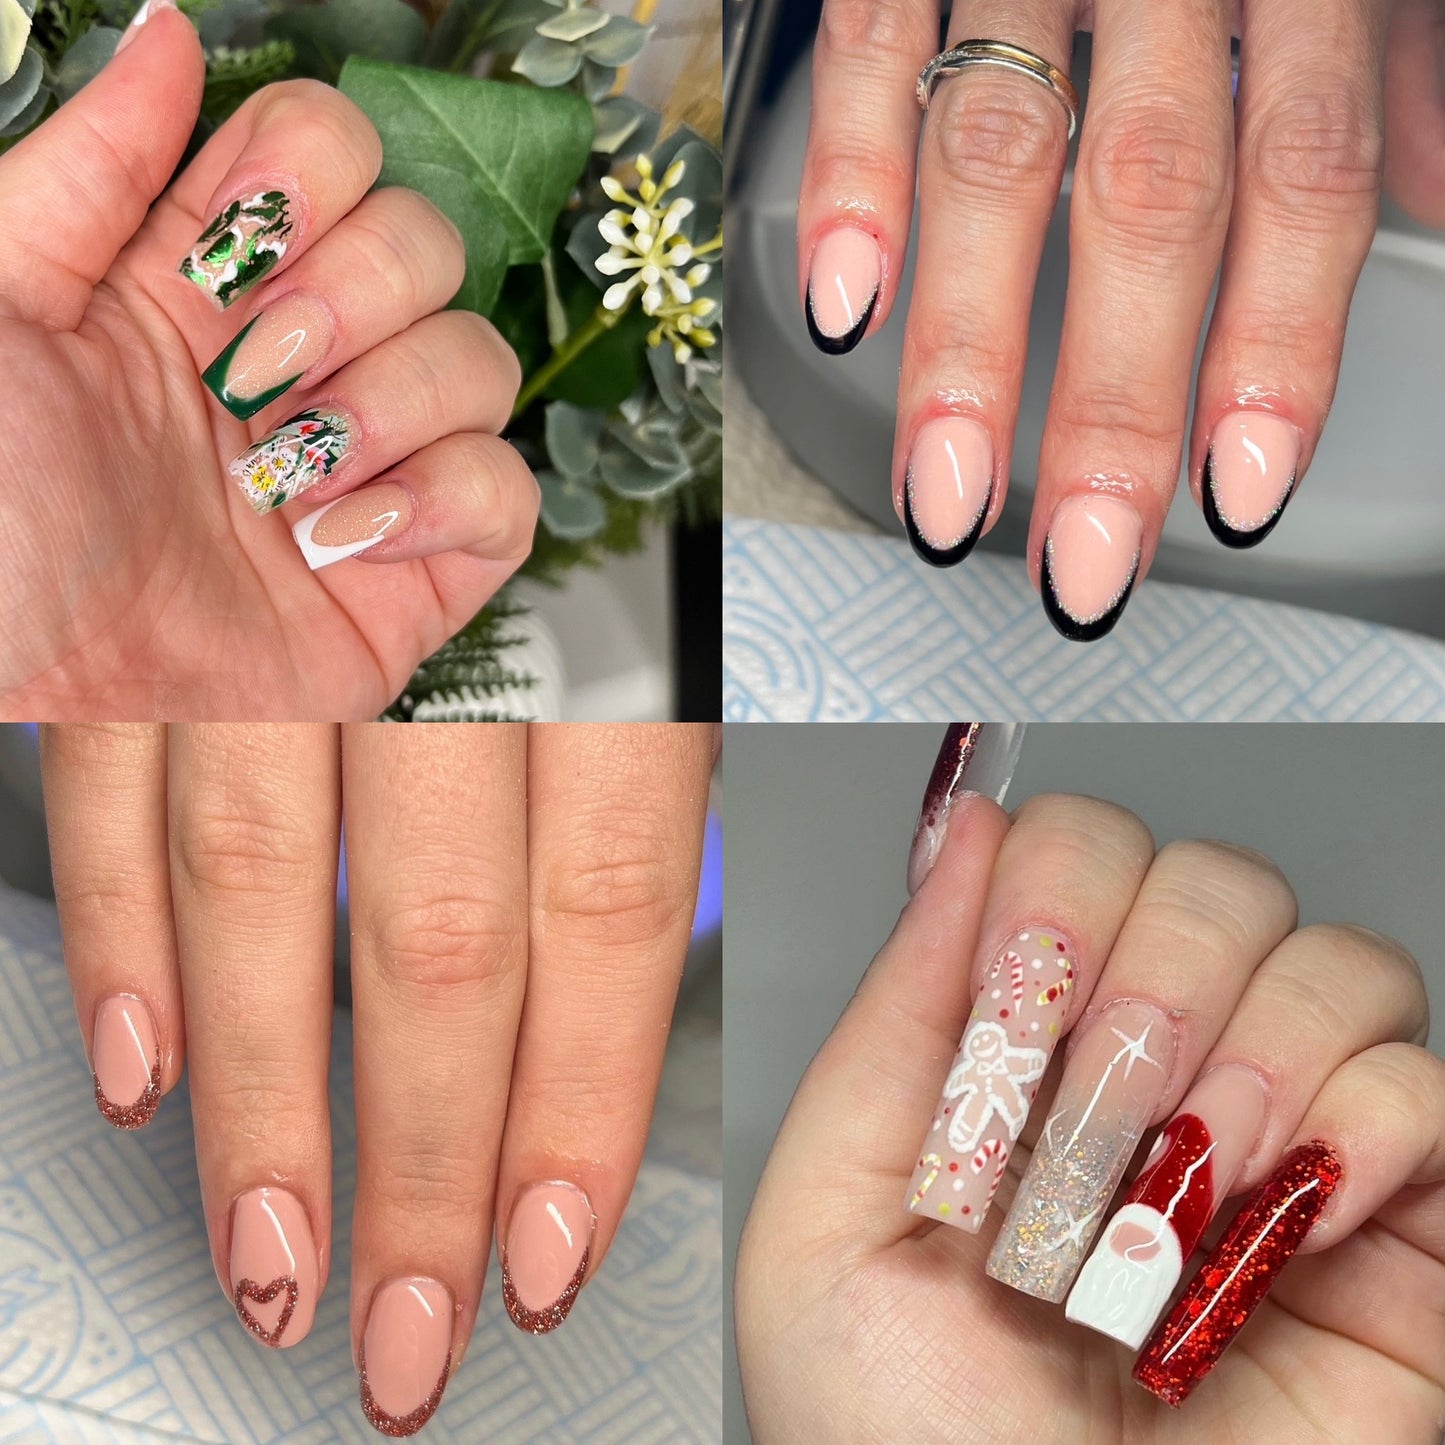 Fast Track to Nail Technician Course